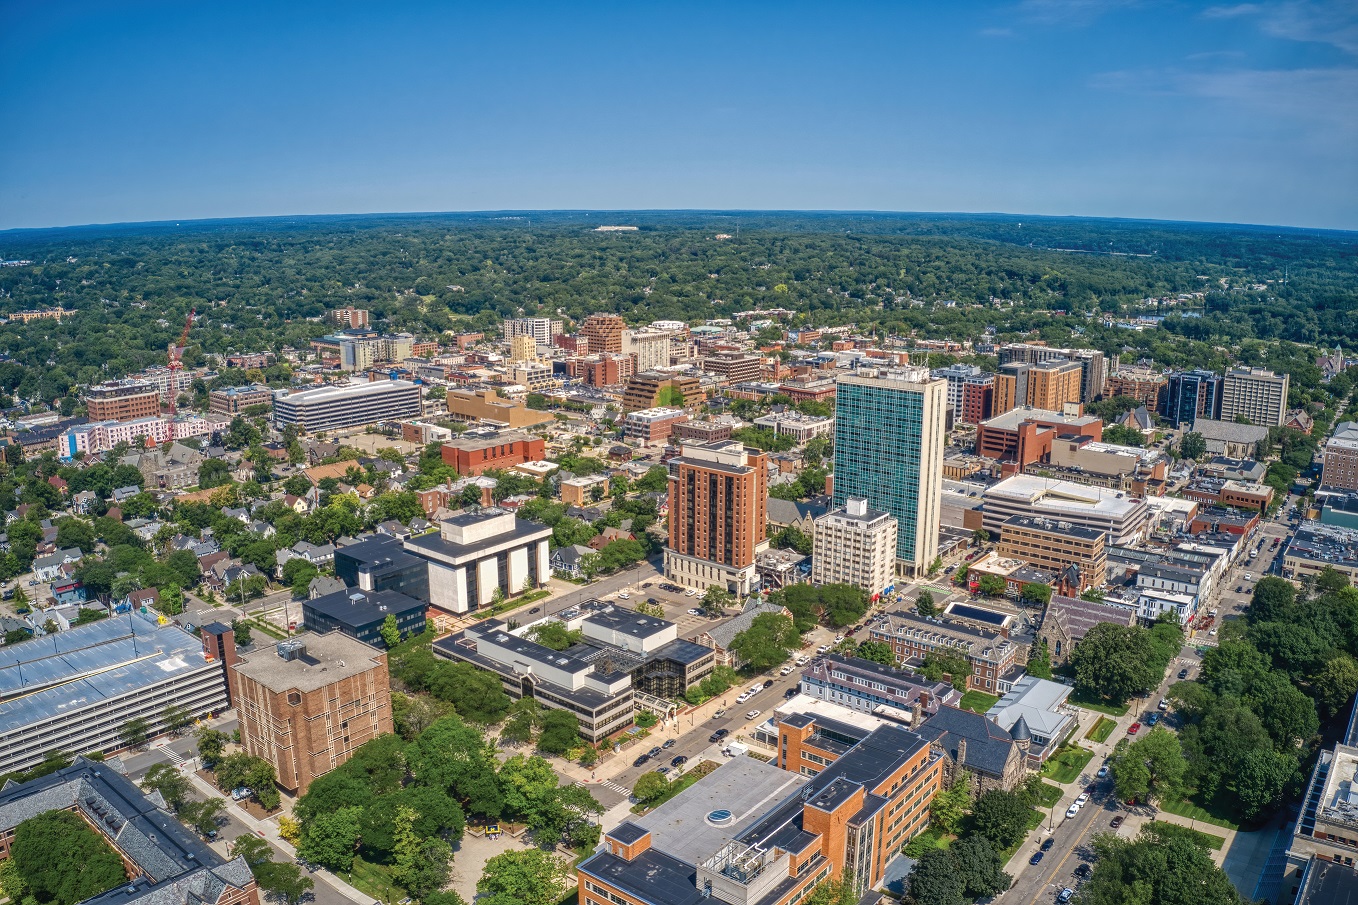 Ann Arbor strives to use 100 renewable energy by 2030